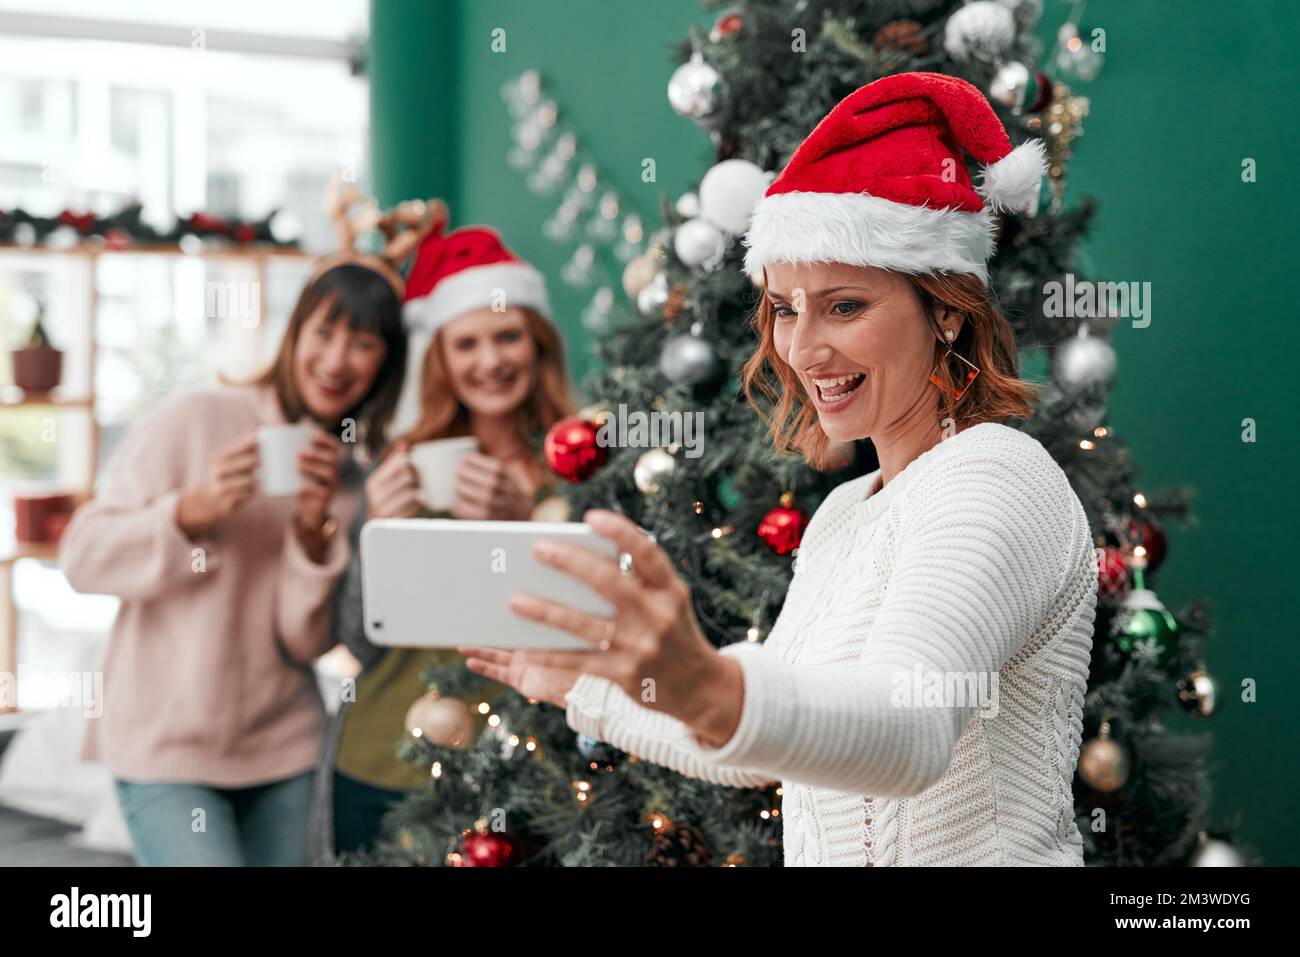 We did good this year. three attractive women taking Christmas selfies together at home. Stock Photo